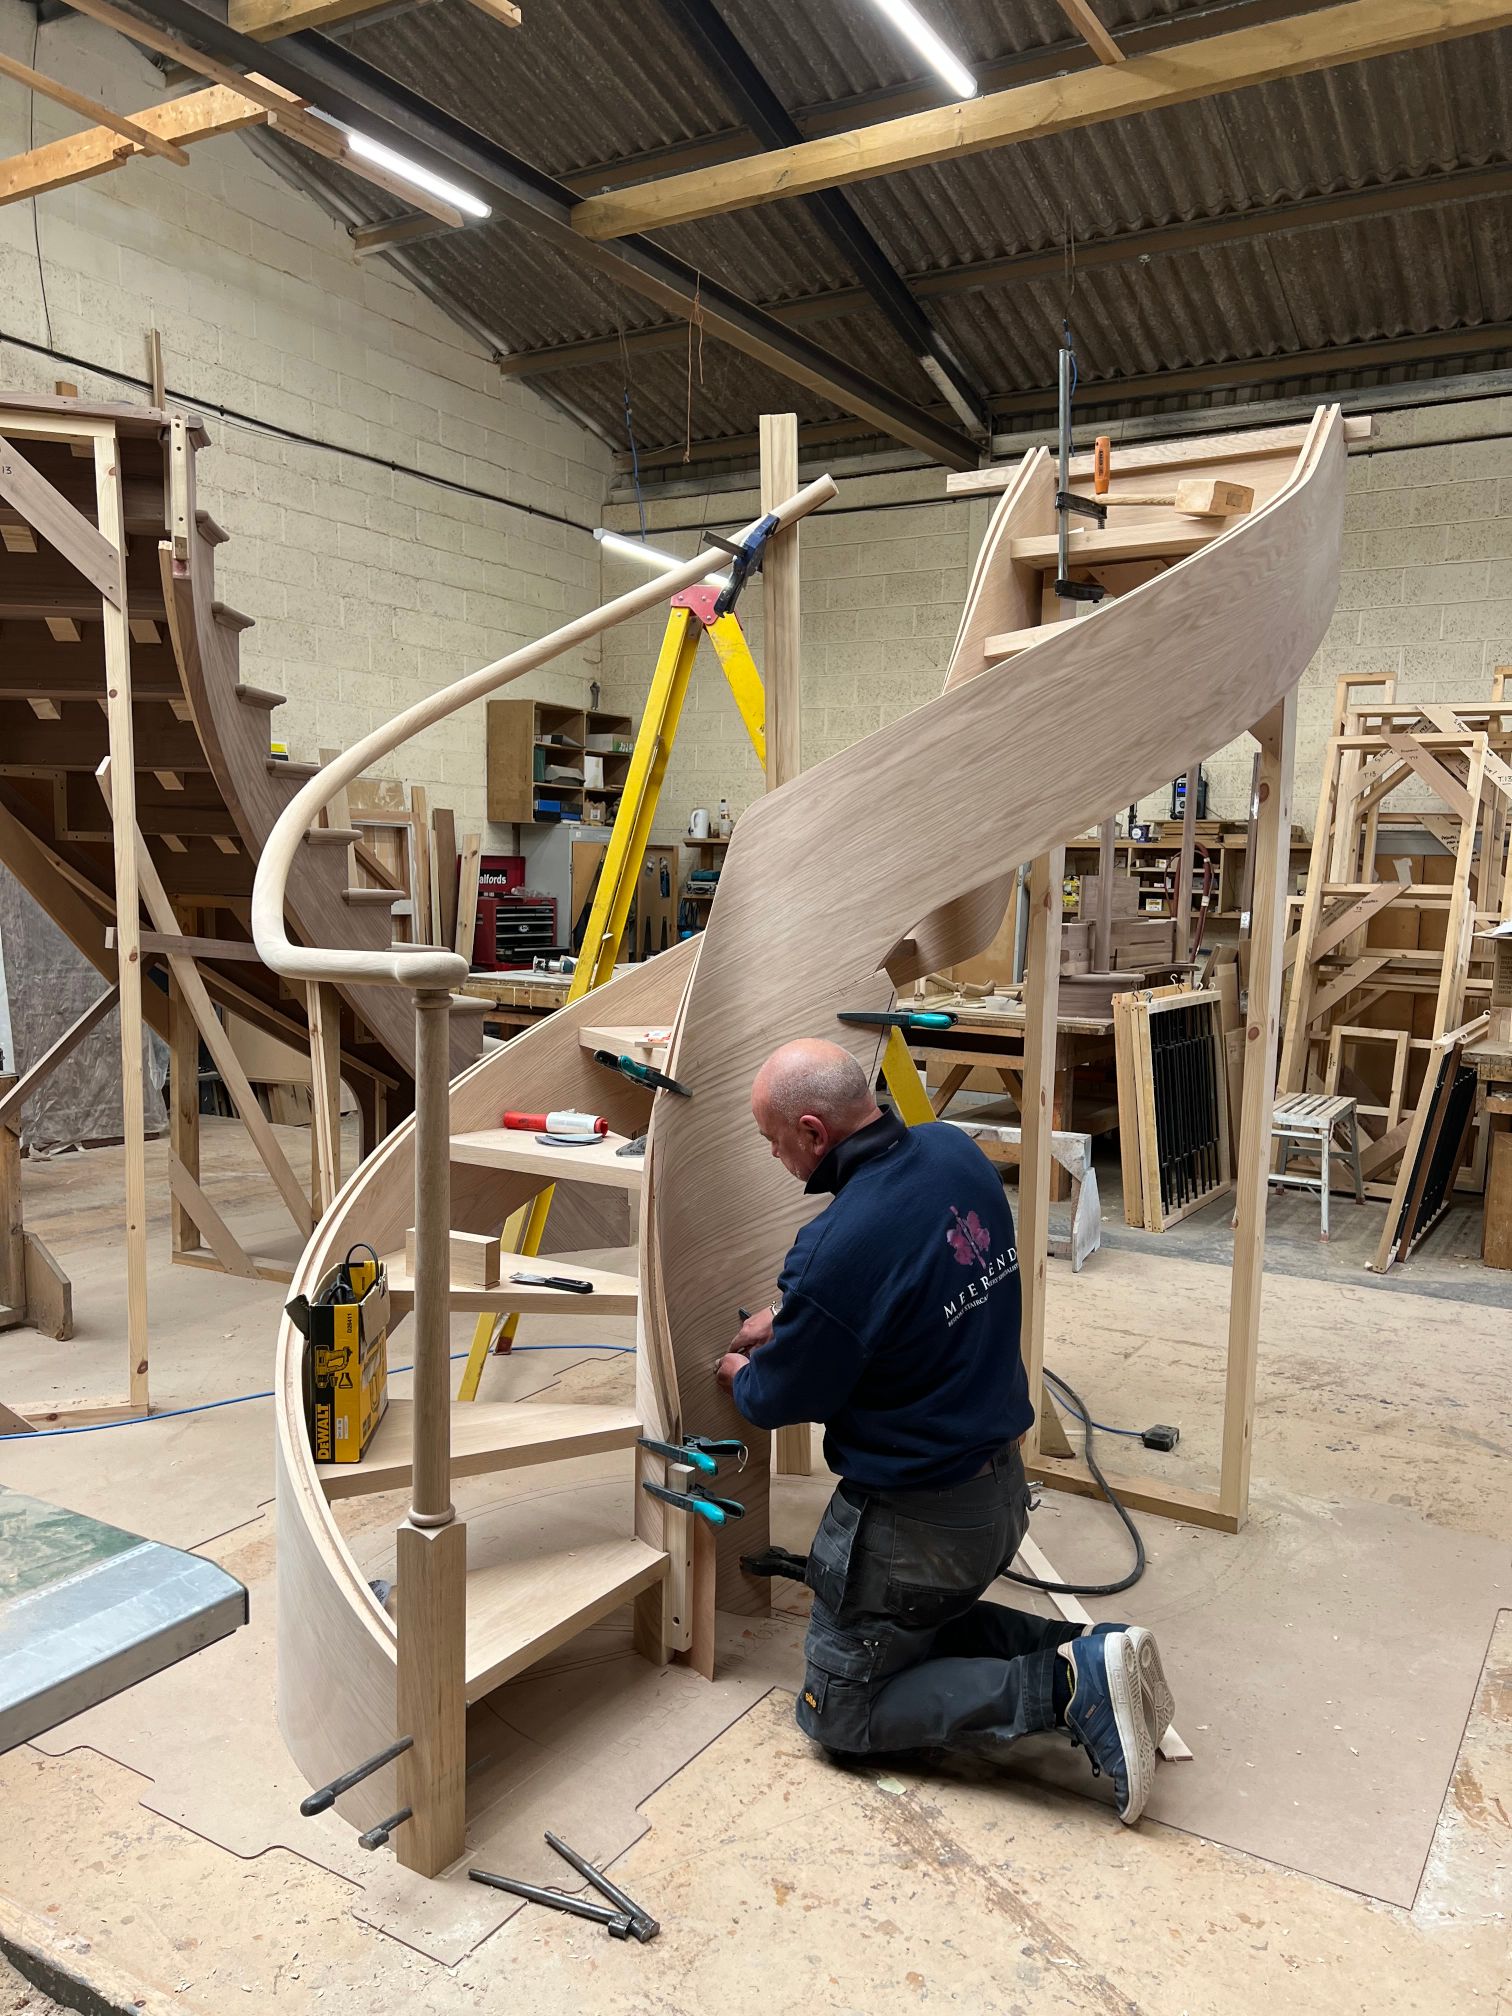 Oak fully helical closed string stair with continuous oak handrail, plain metal bar balustrade.